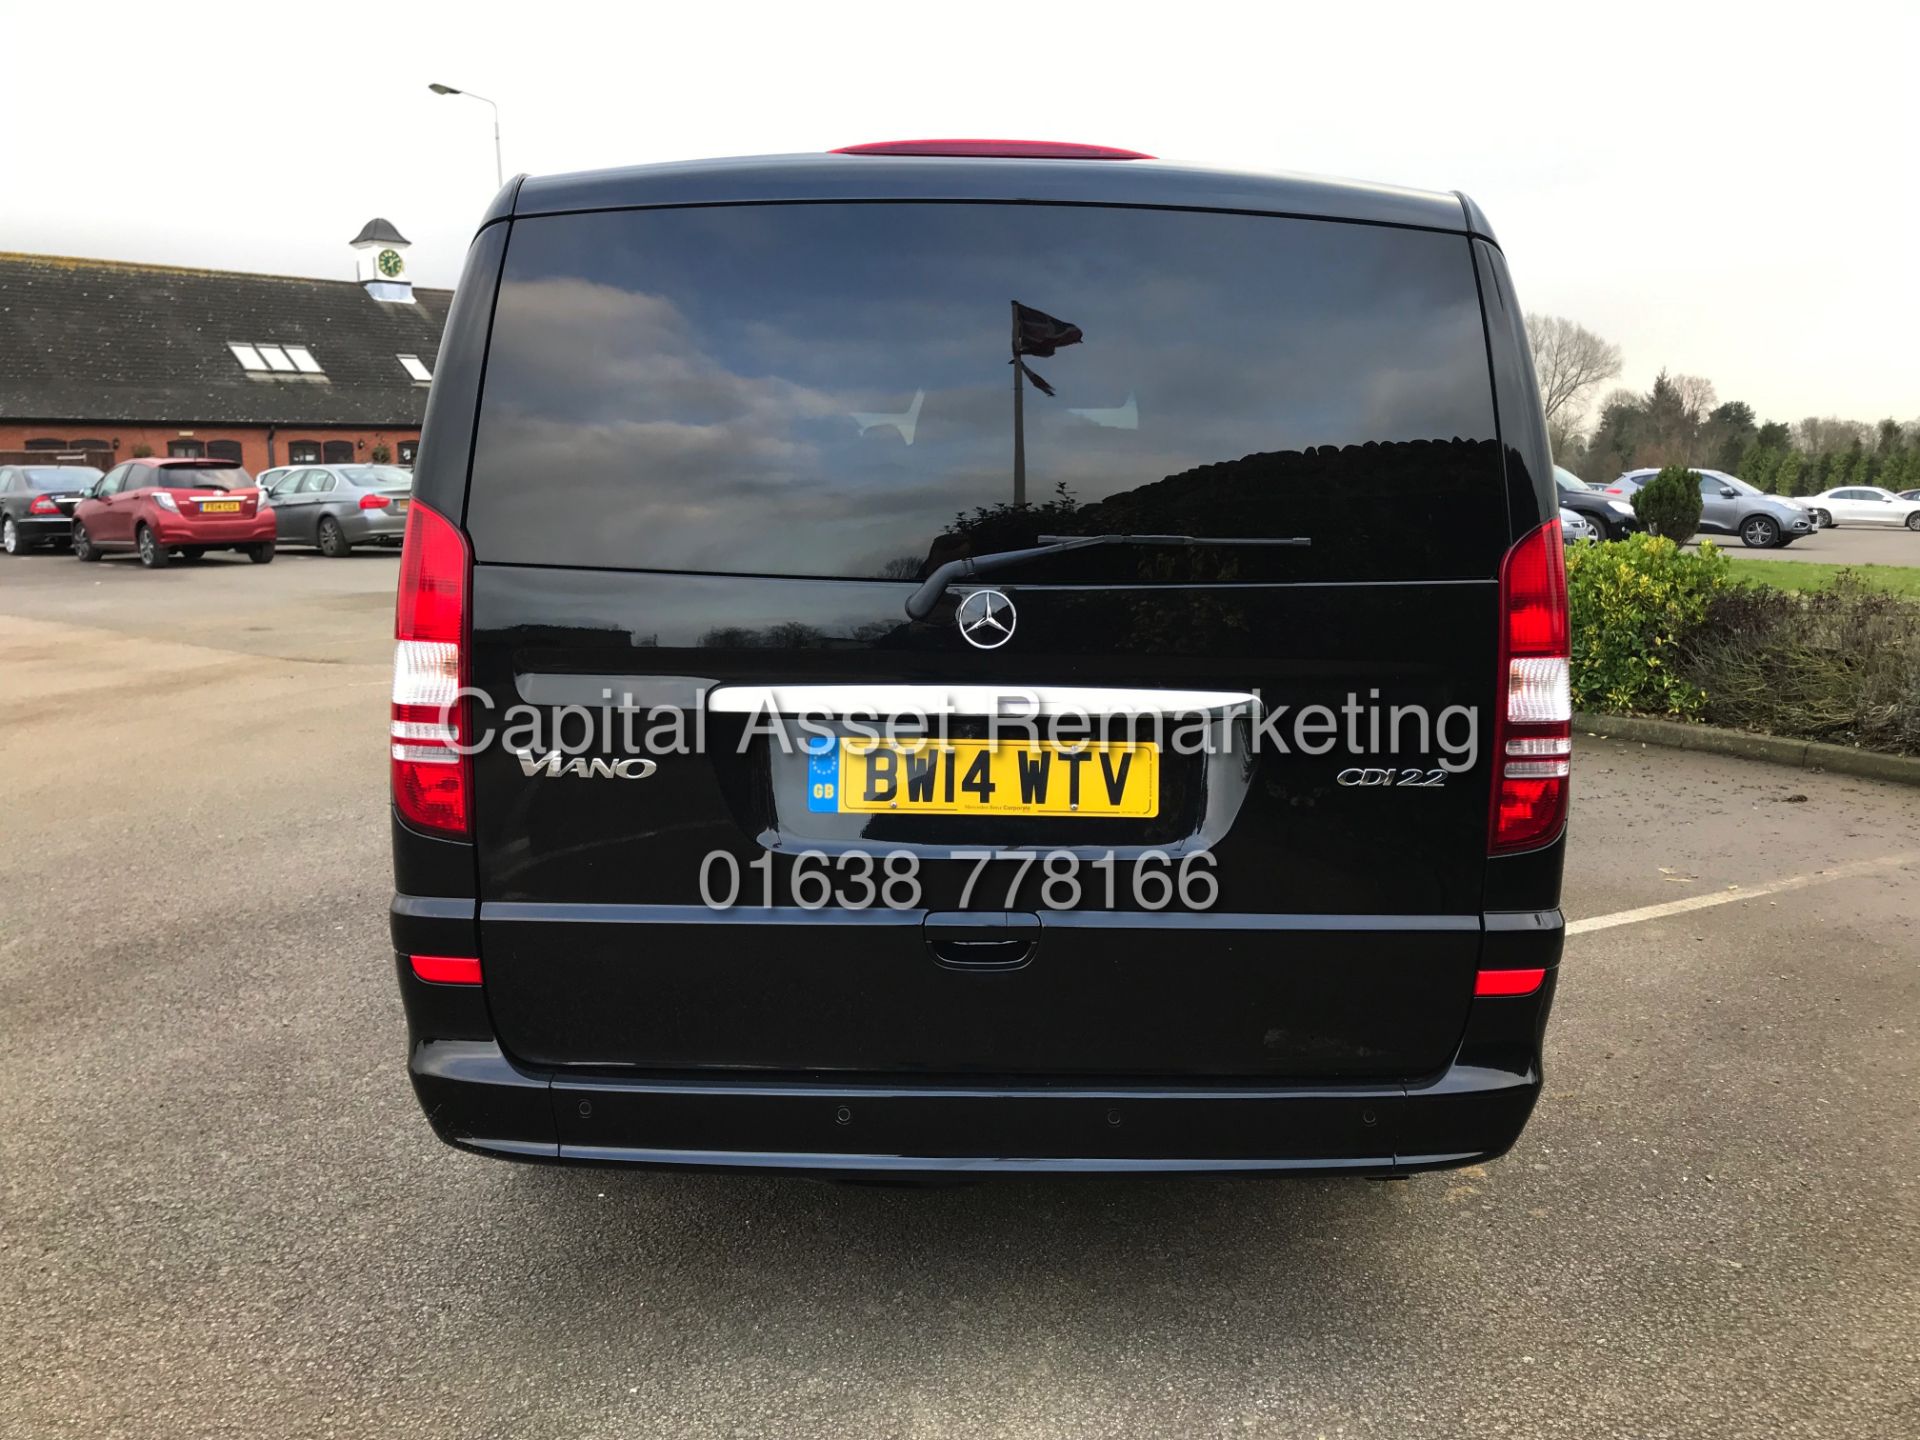 (ON SALE) MERCEDES VIANO 2.2CDI "AMBIENET" XLWB 8 SEATER (14 REG) 1 OWNER - FULLY LOADED - LEATHER - Image 4 of 28